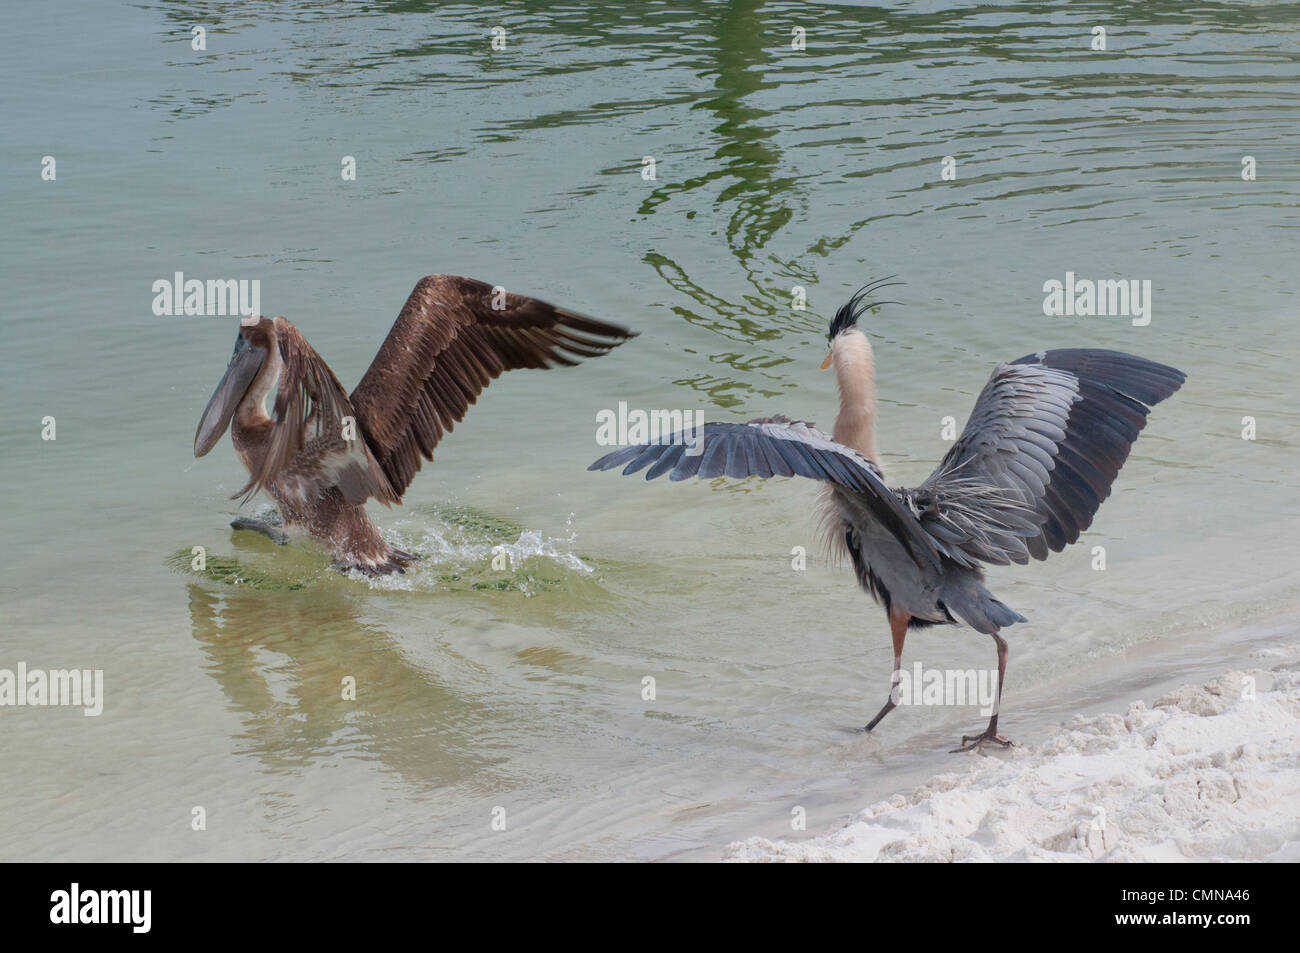 A Great Blue Heron chasing a Brown Pelican. Stock Photo